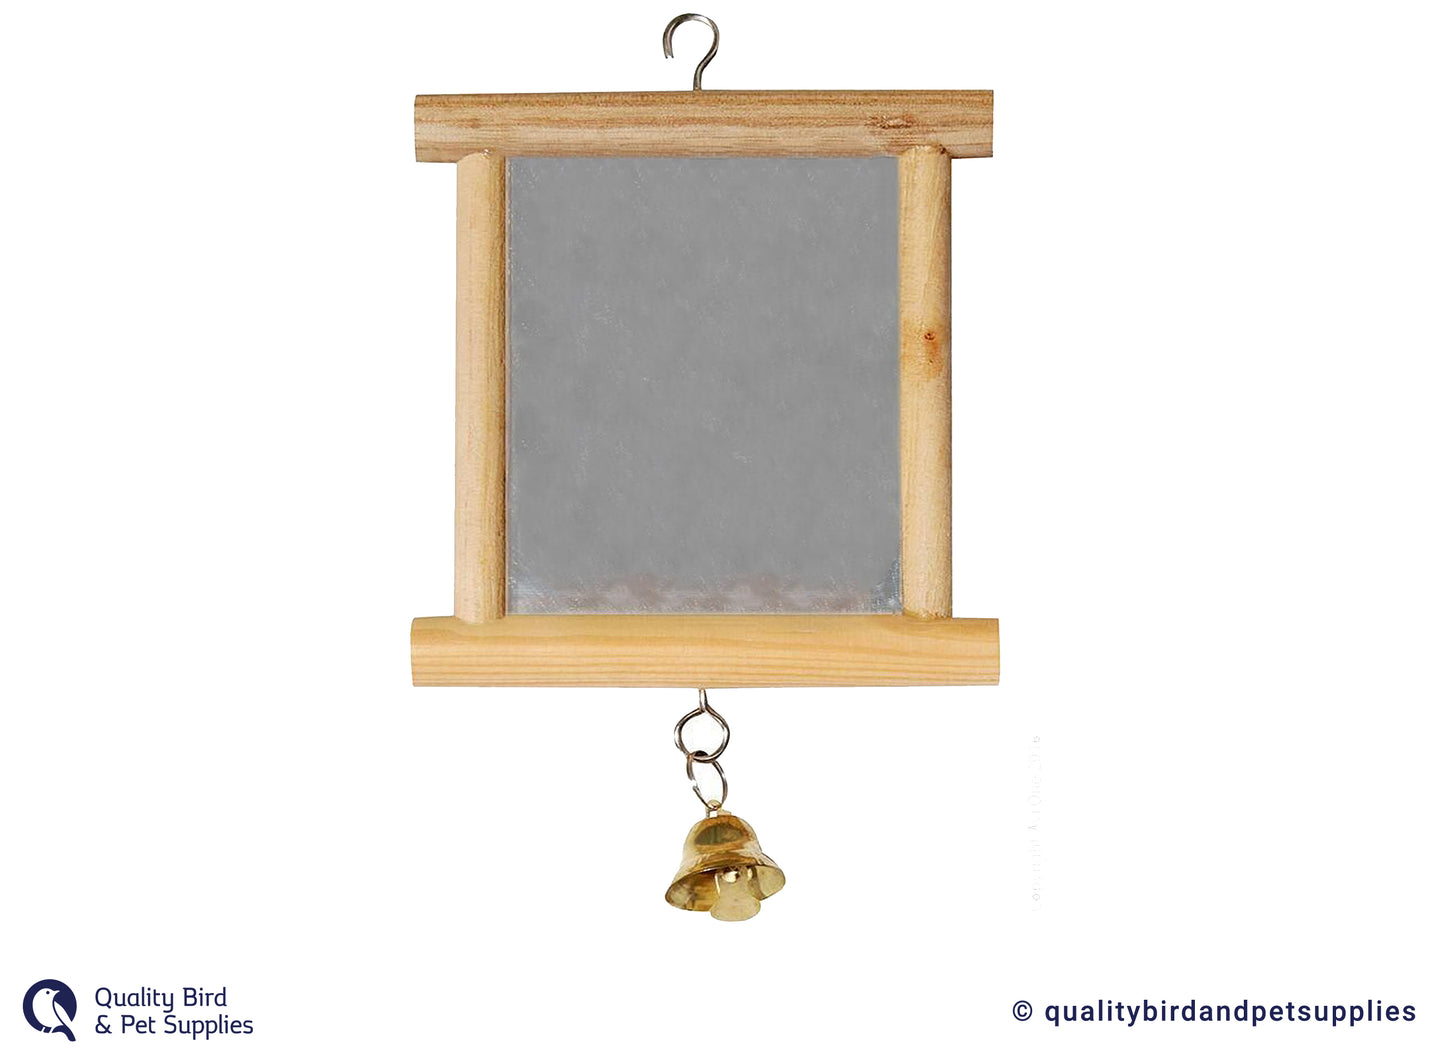 Avi One Bird Toy - Wood Framed Mirror With Bell